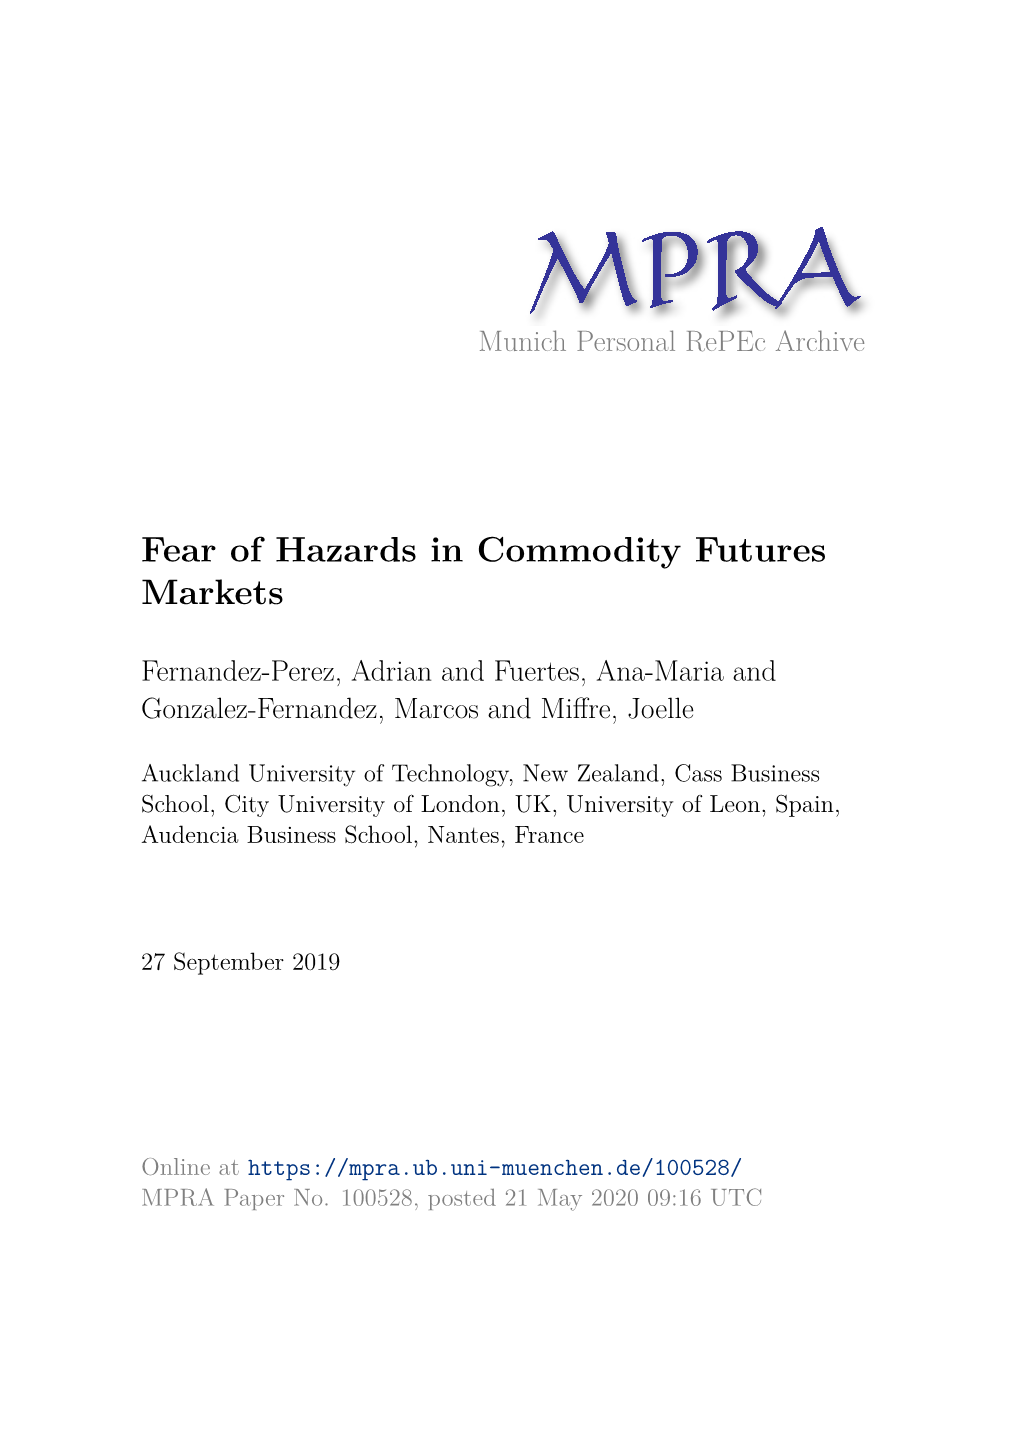 Fear of Hazards in Commodity Futures Markets